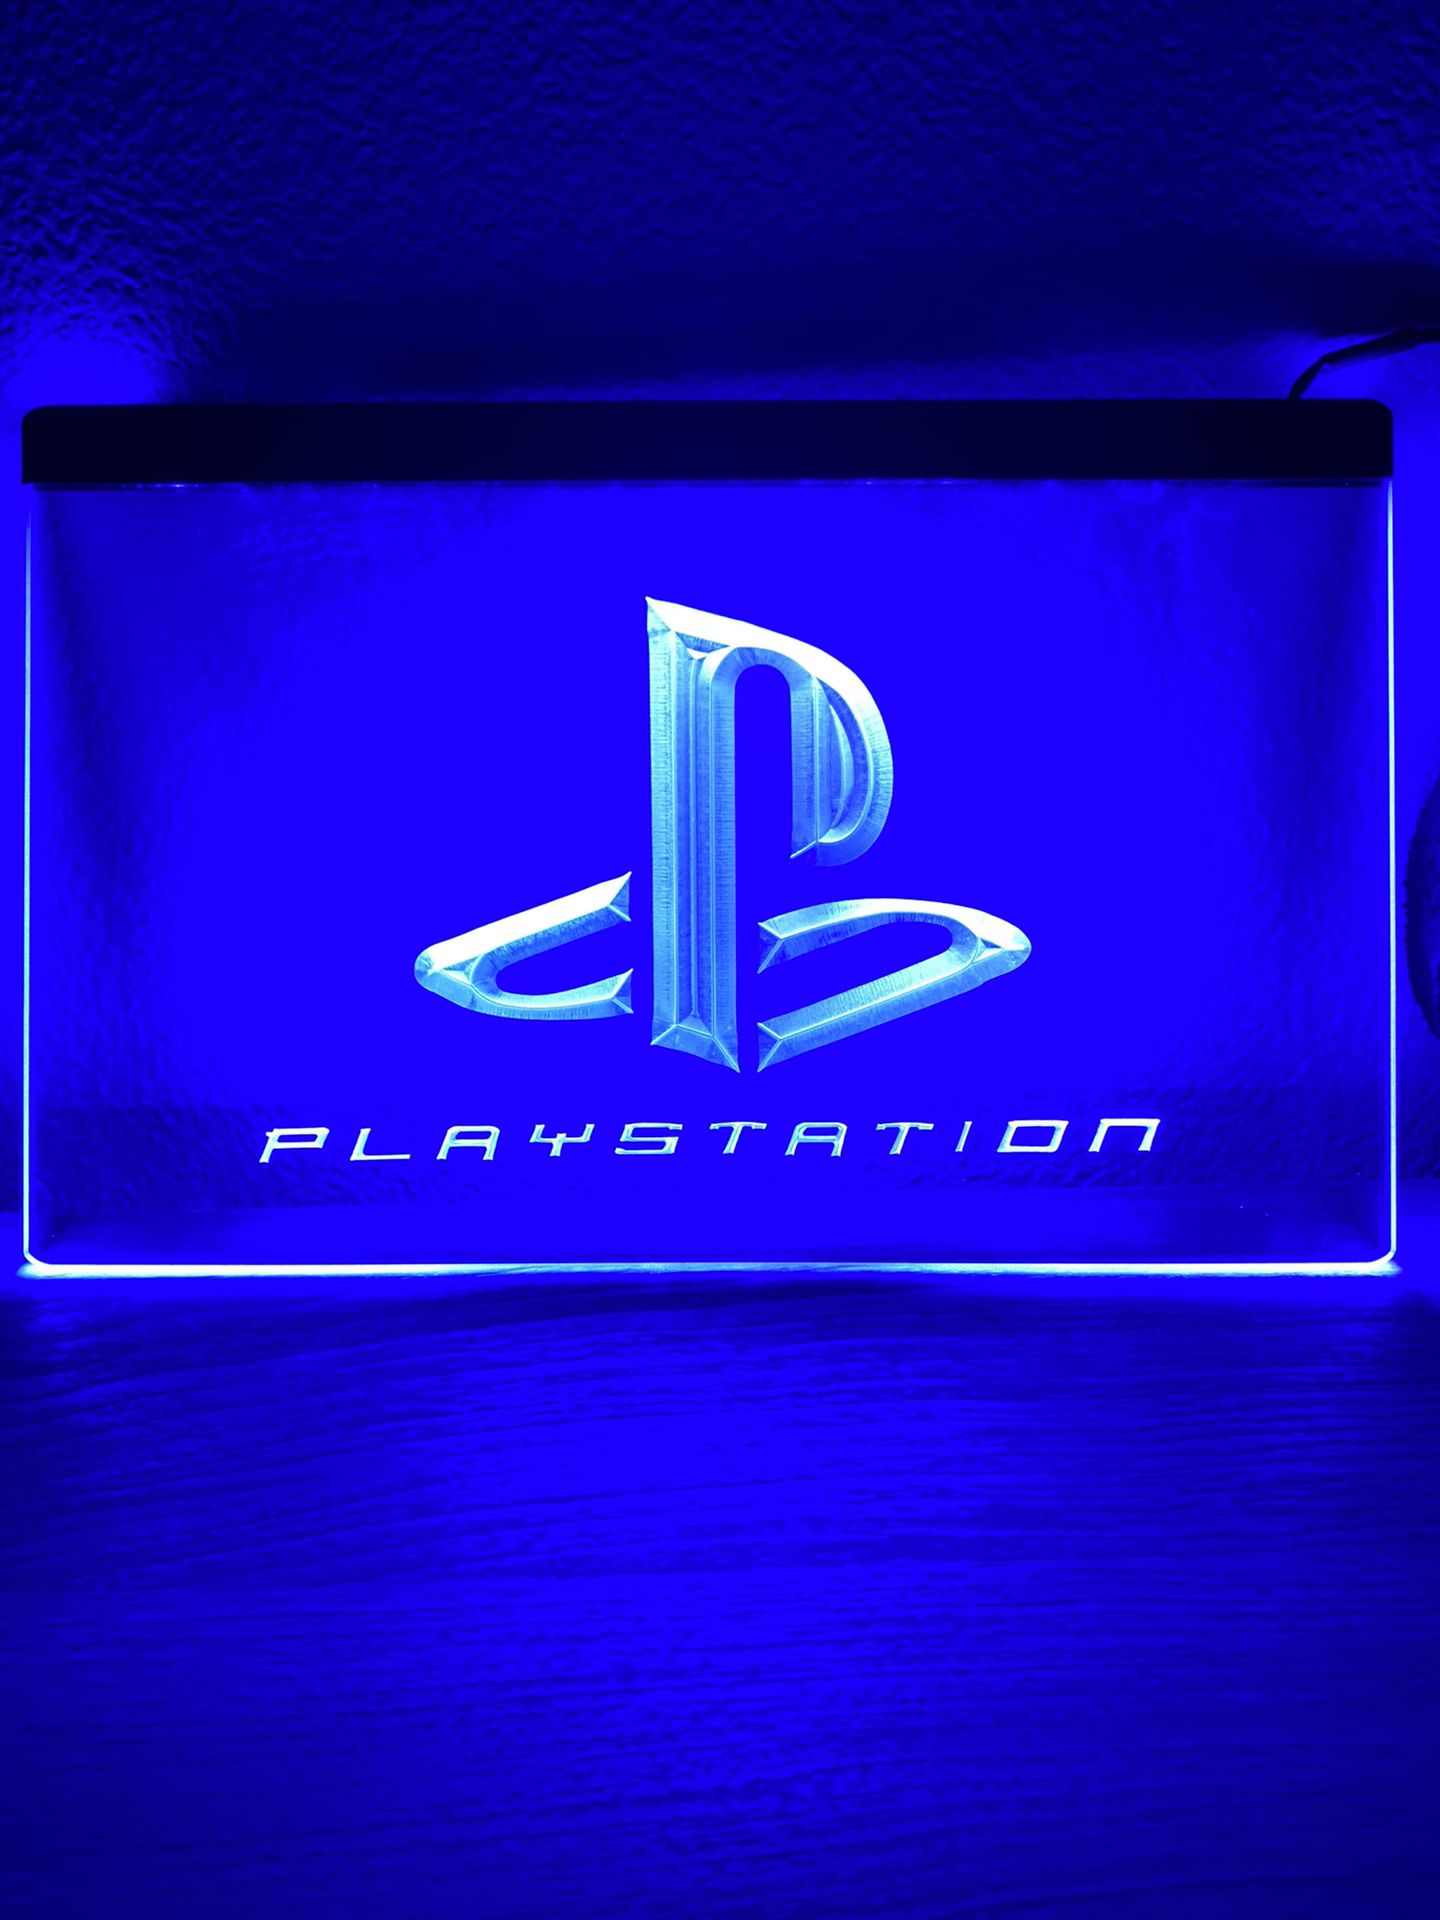 PlayStation PS4 PS5 Supreme LED Neon Display Sign - Gamer GameStop Twitch Stream Xbox Ninja Sony